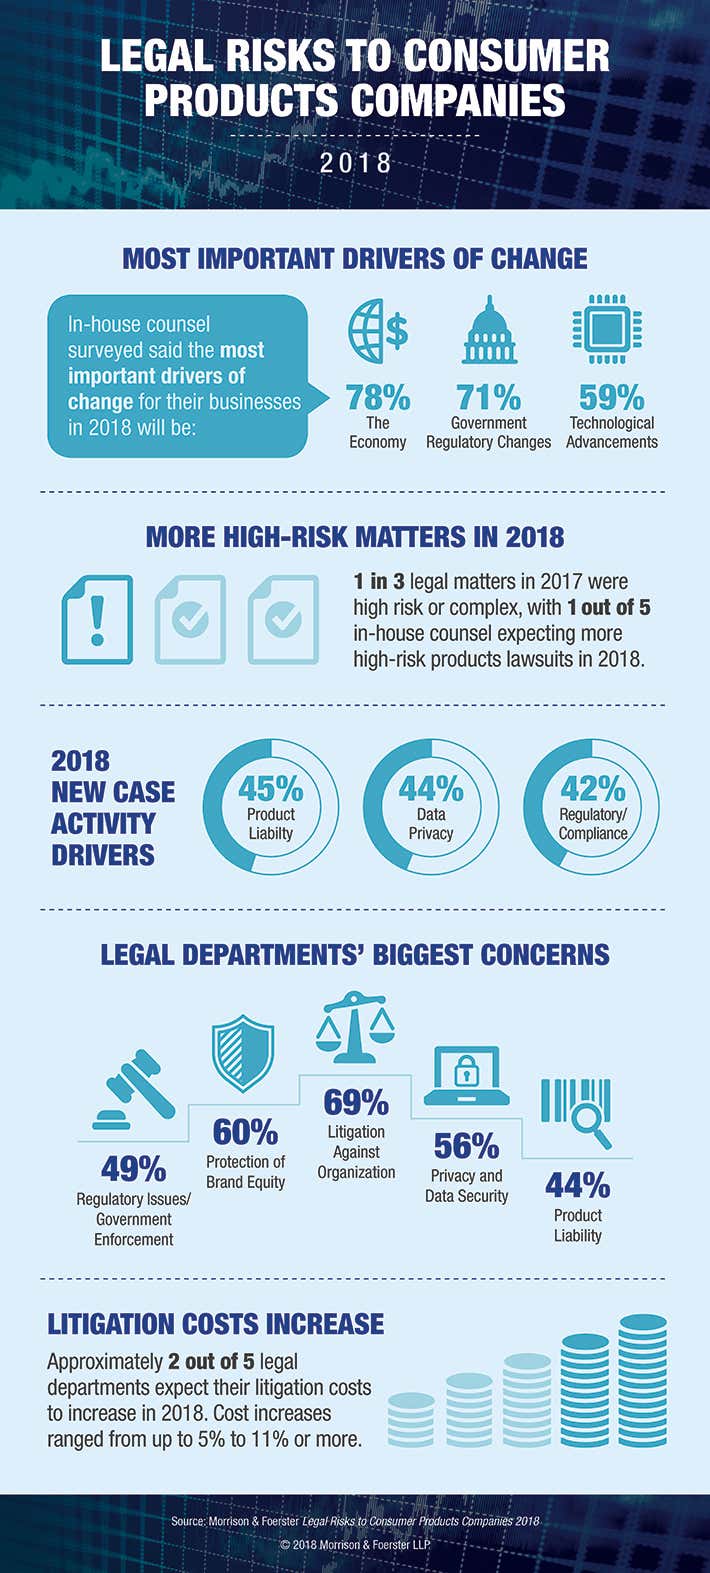 What are the biggest legal risks facing consumer products companies in 2018?